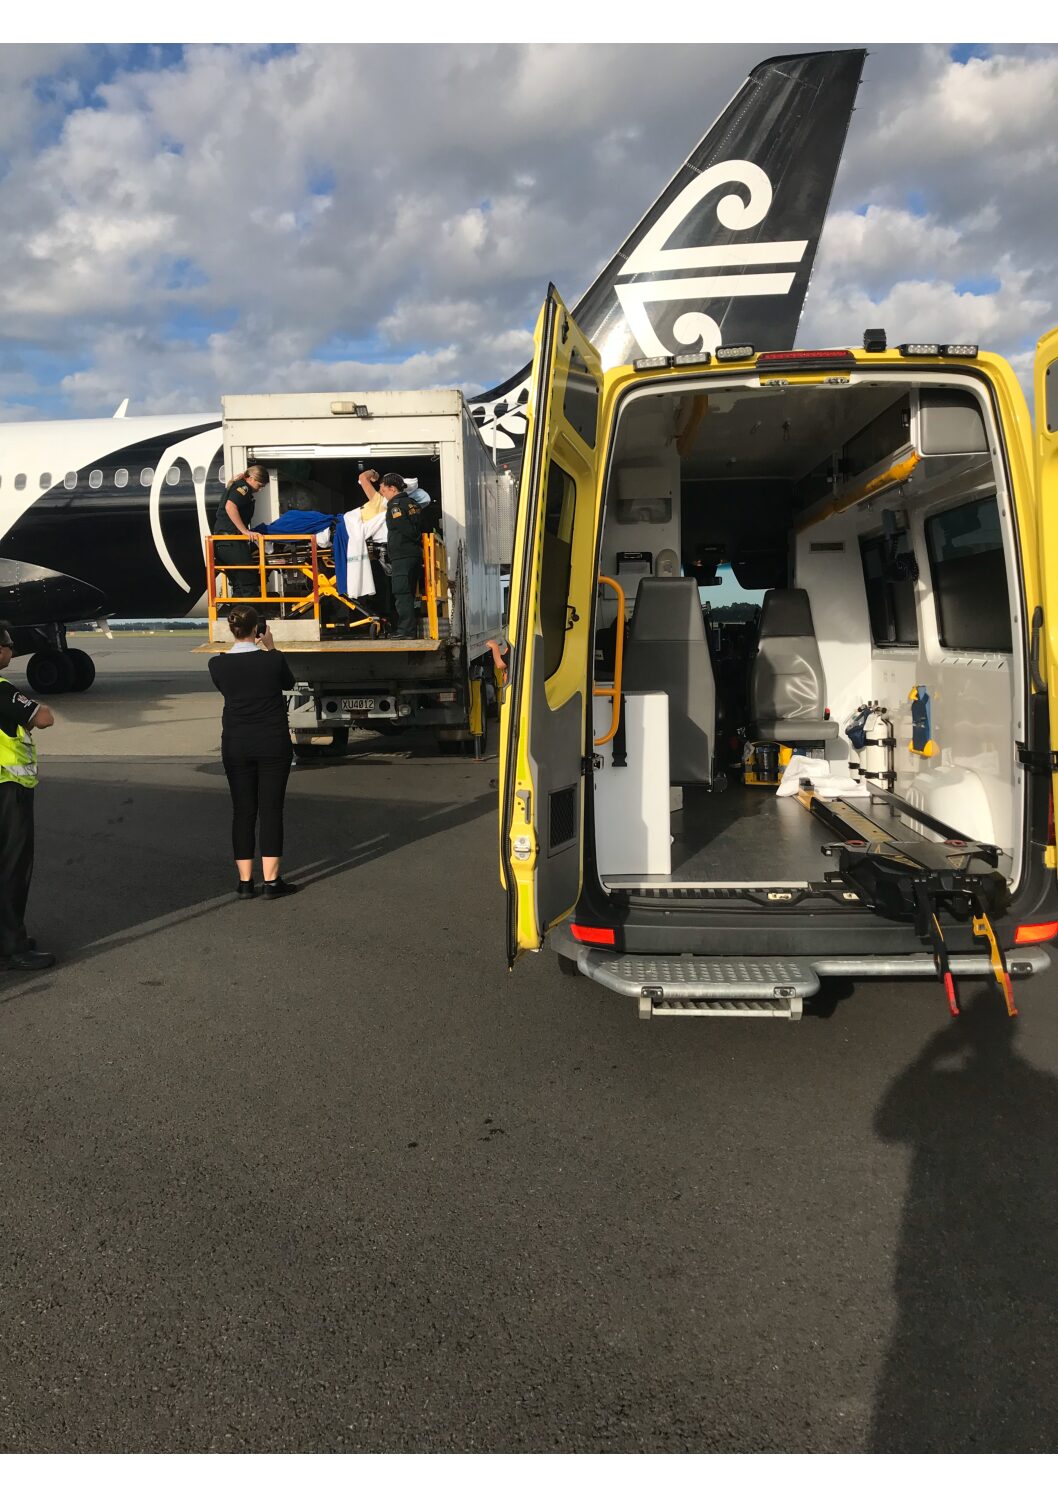 Commercial Medical Stretcher Repatriations: Cost-Effective Care for Families and Insurers